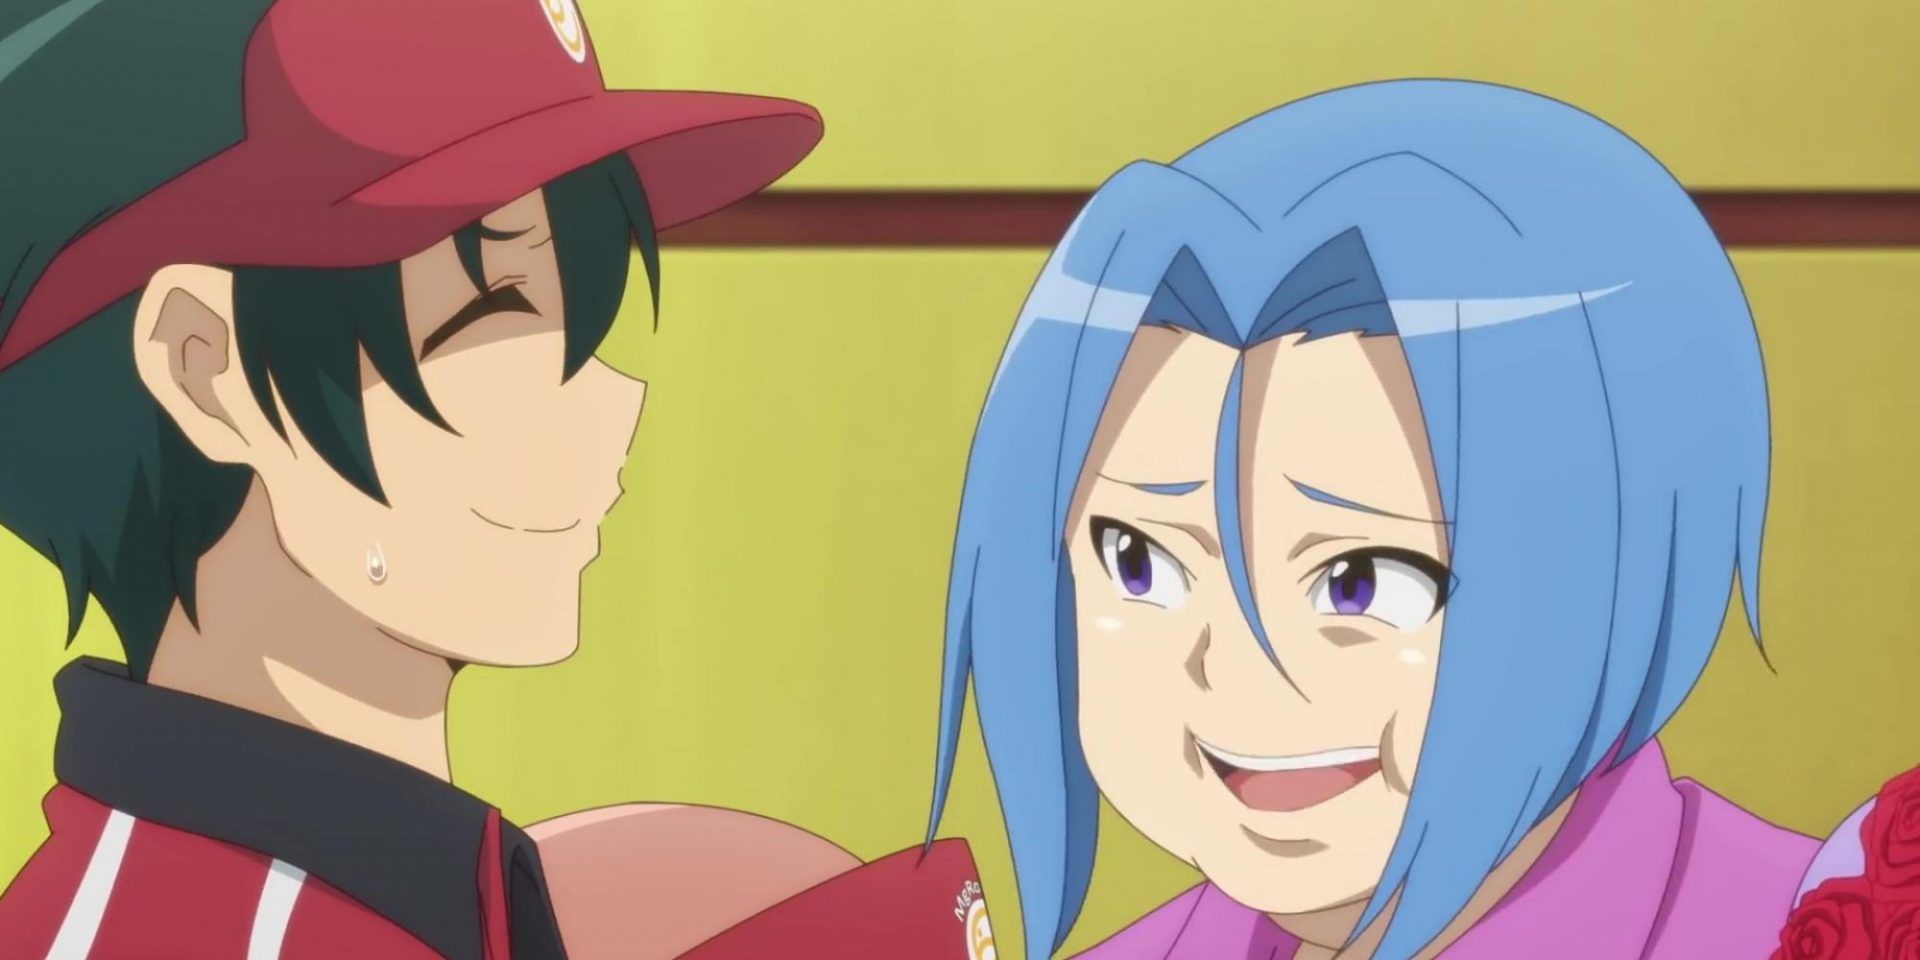 The Devil Is A Part-Timer Season 2 Episode 6 Review: Attack Of The Humans